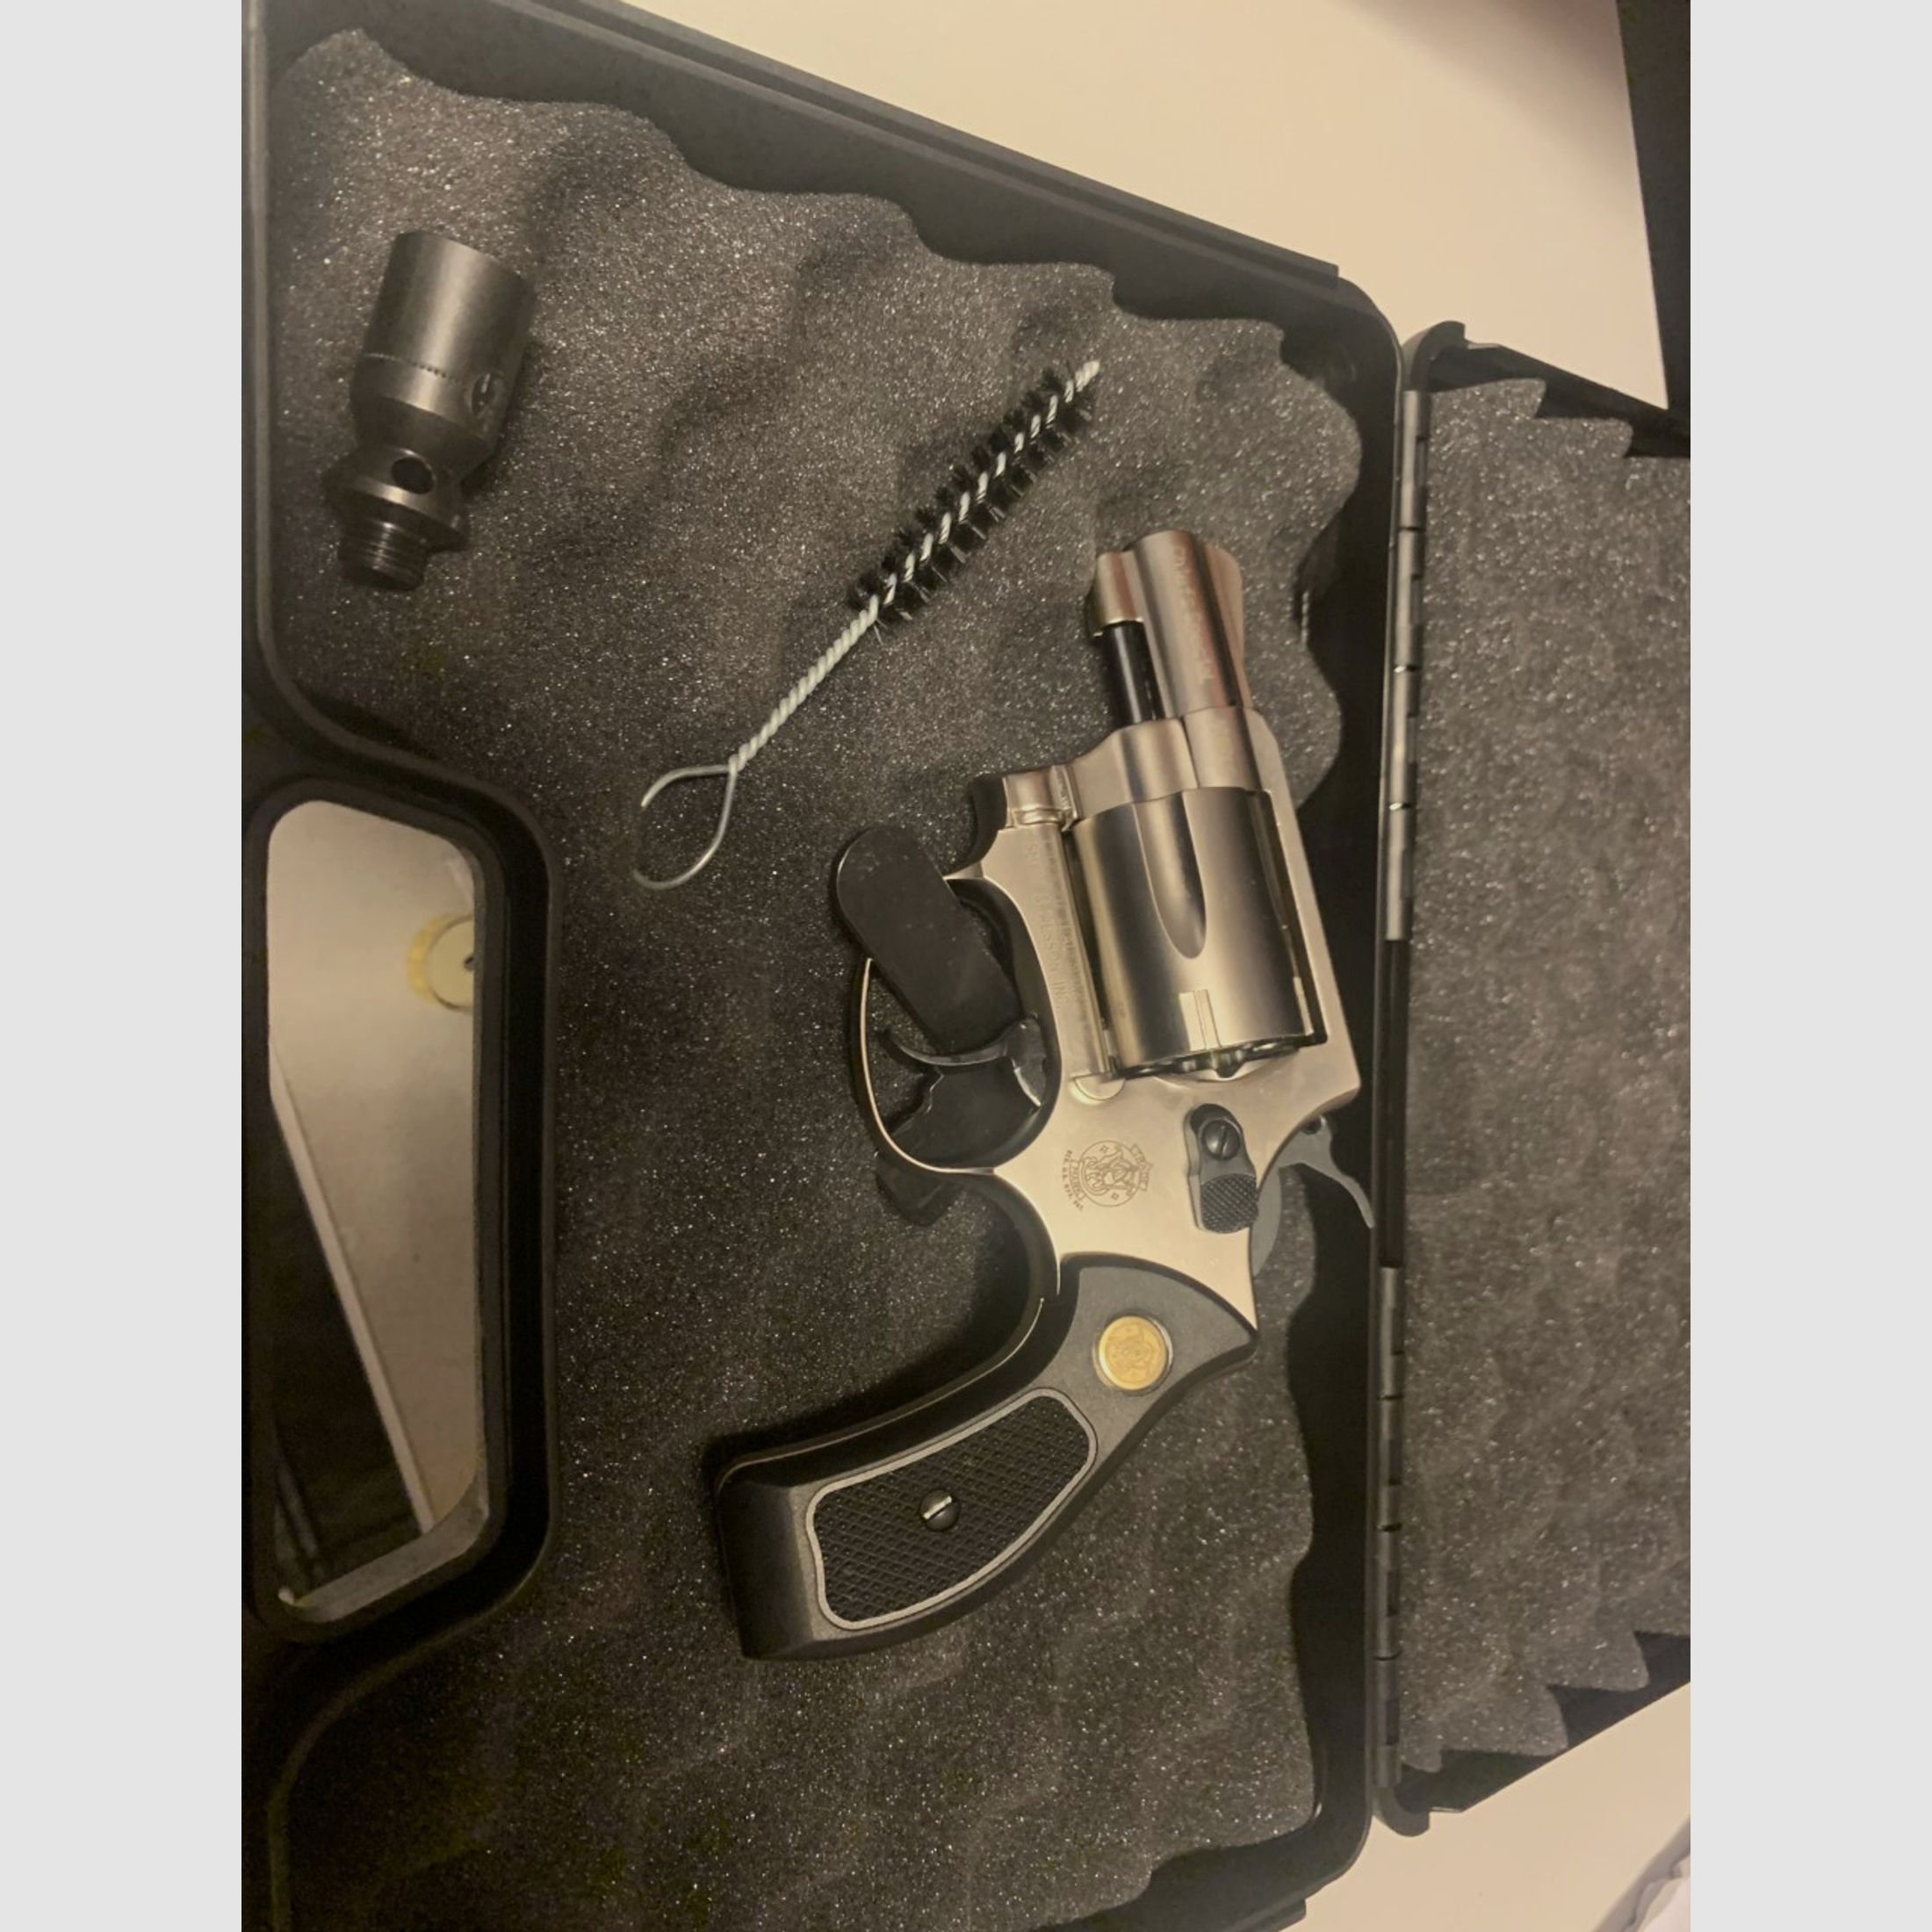 Smith & Wesson Chief Special 9mm R.K